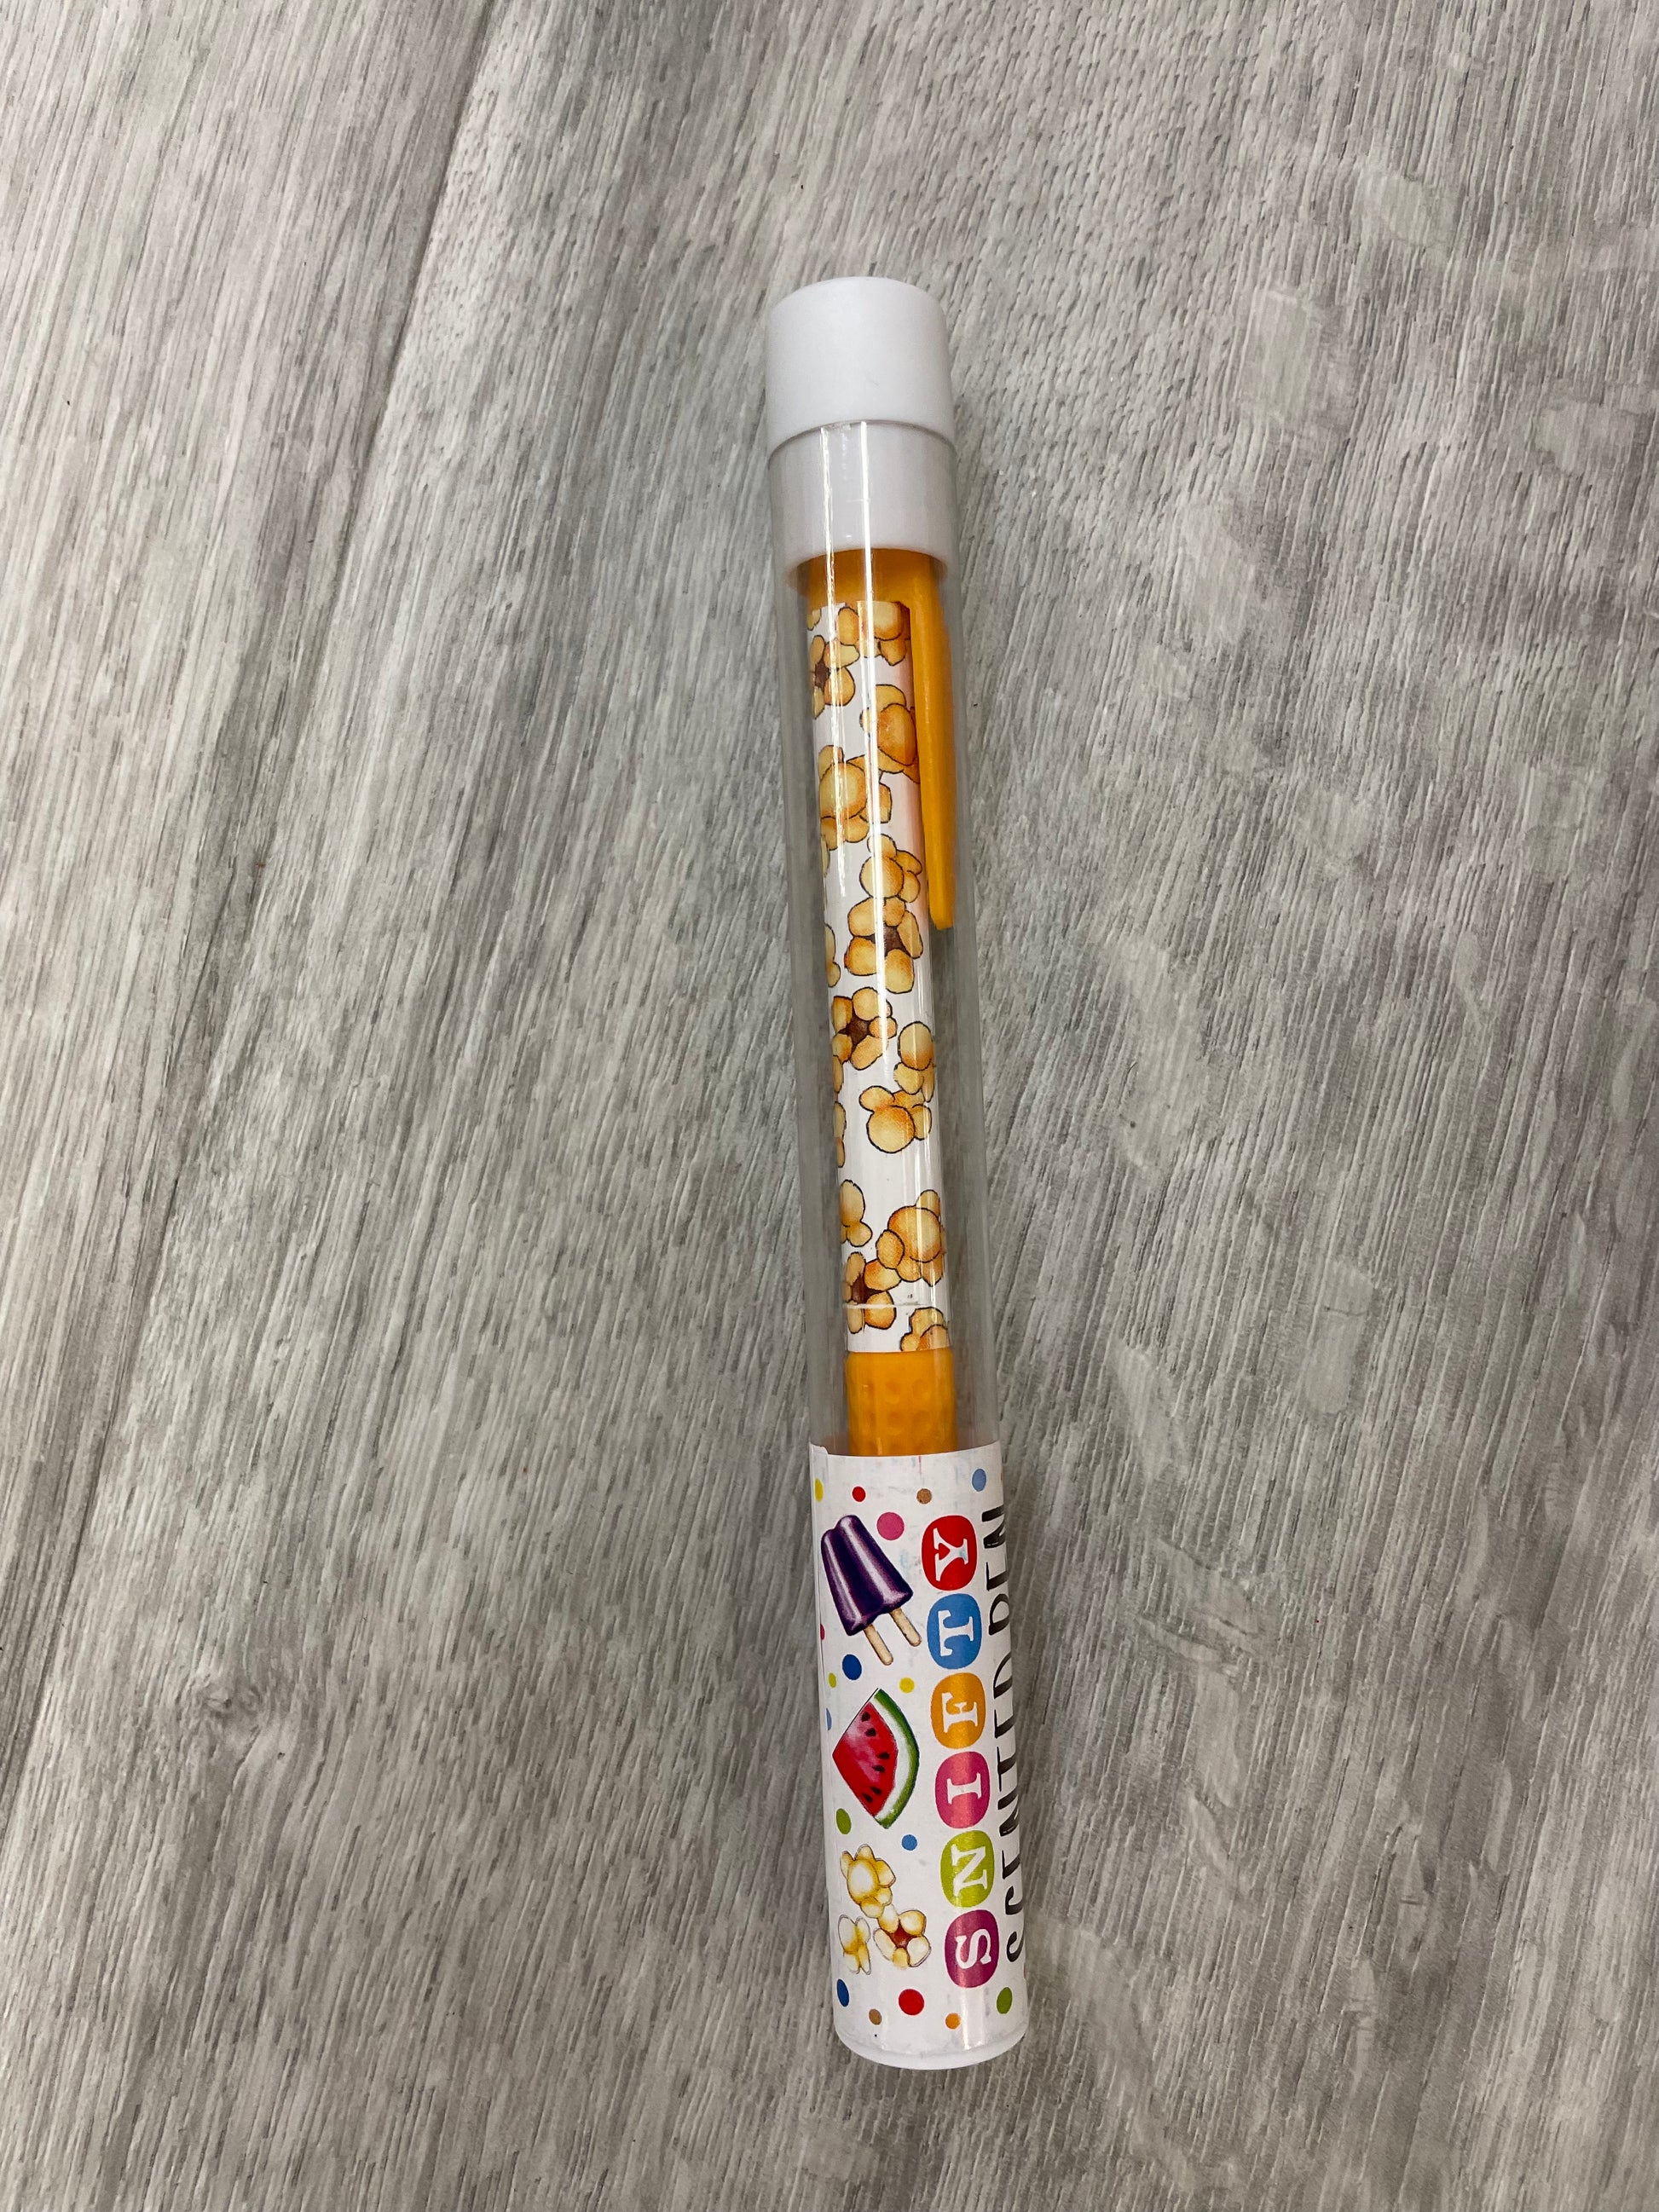 Snifty - Junk Food Scented Pencil Donut